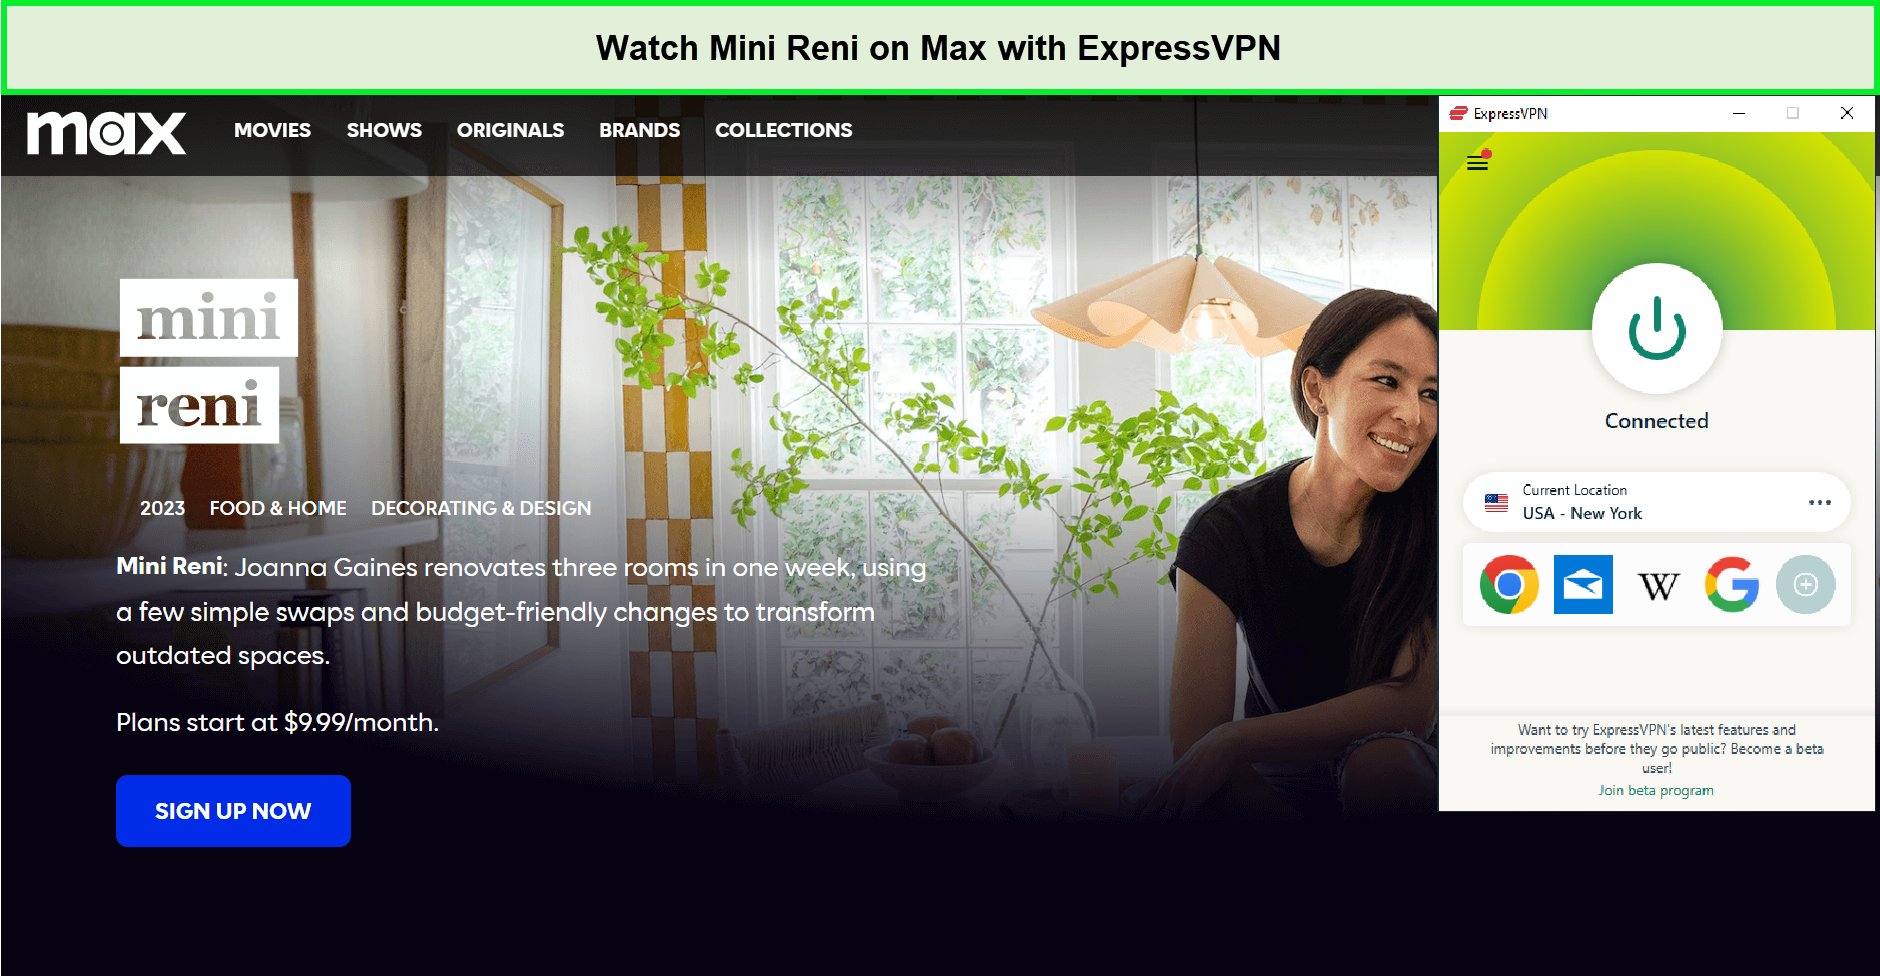 Watch-Mini-Reni-in-Netherlands-on-Max-with-ExpressVPN